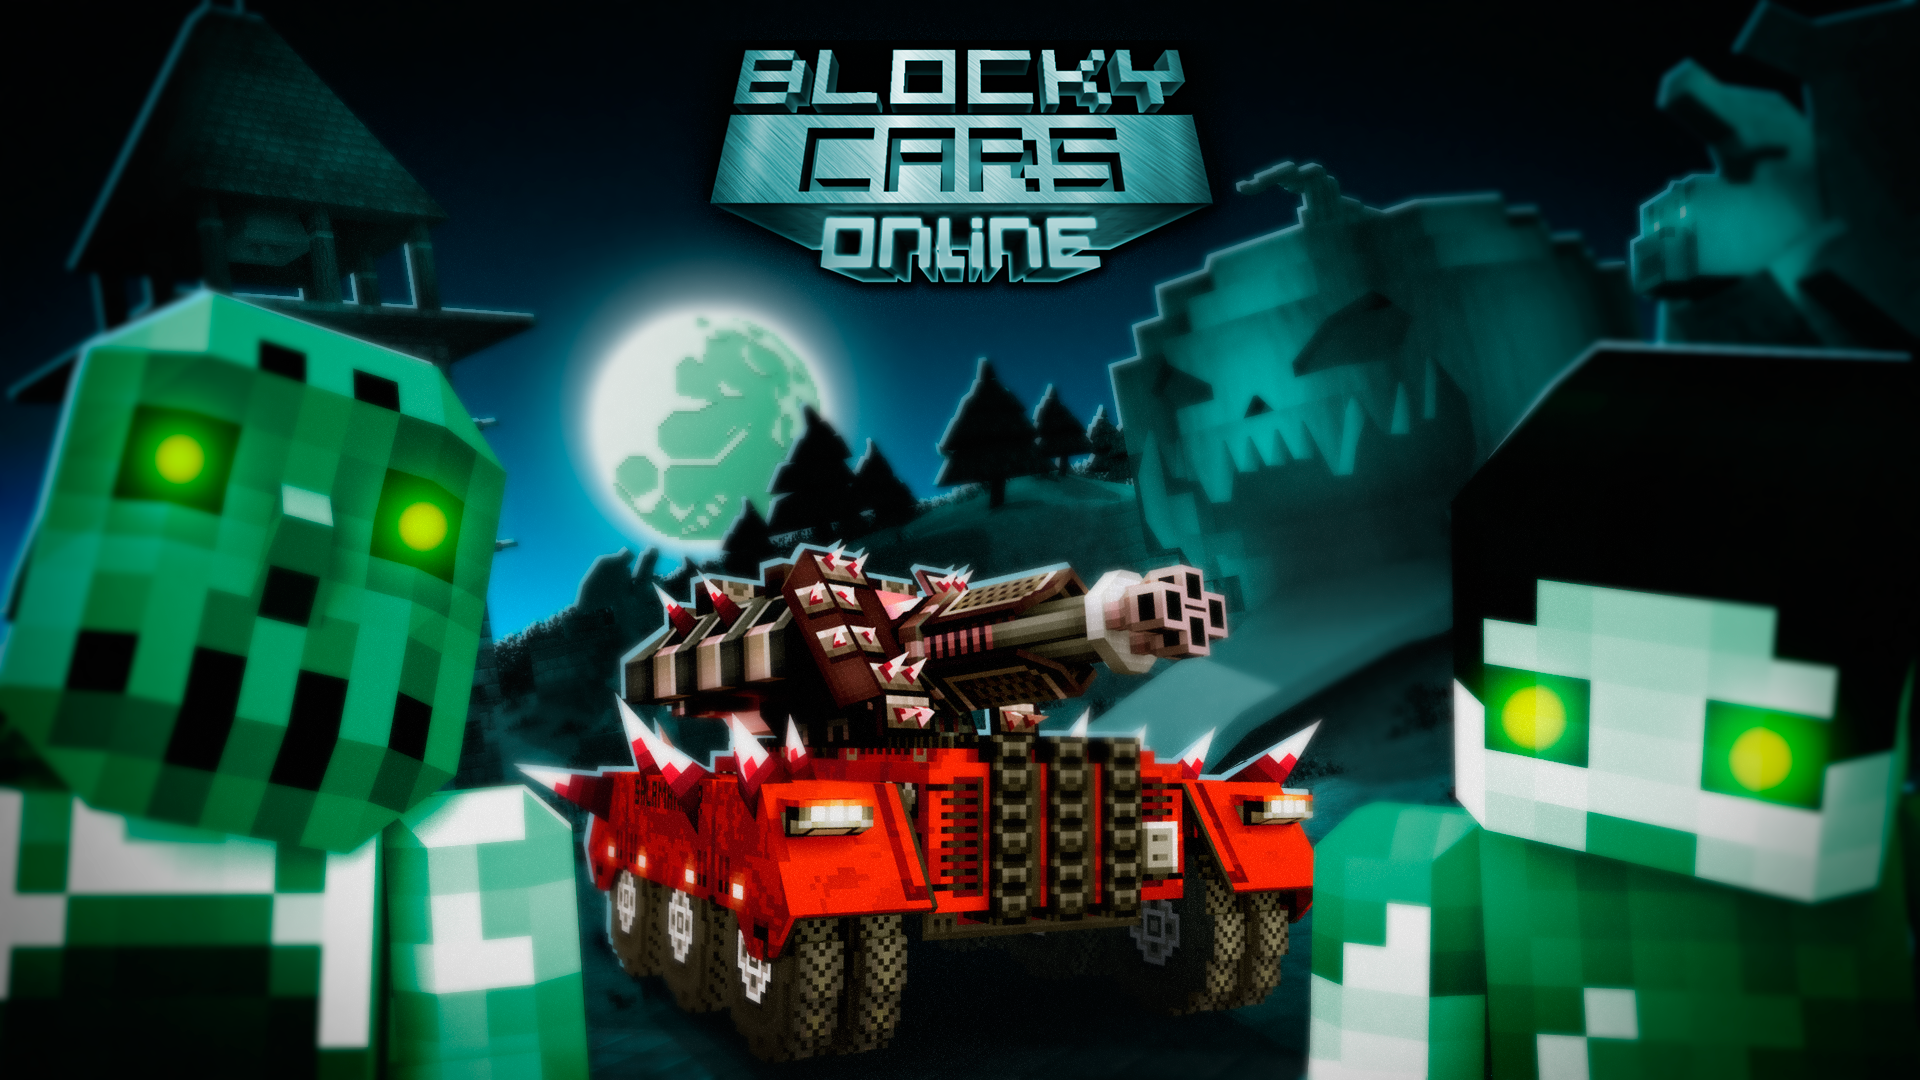 Android application Blocky Cars tank games, online screenshort